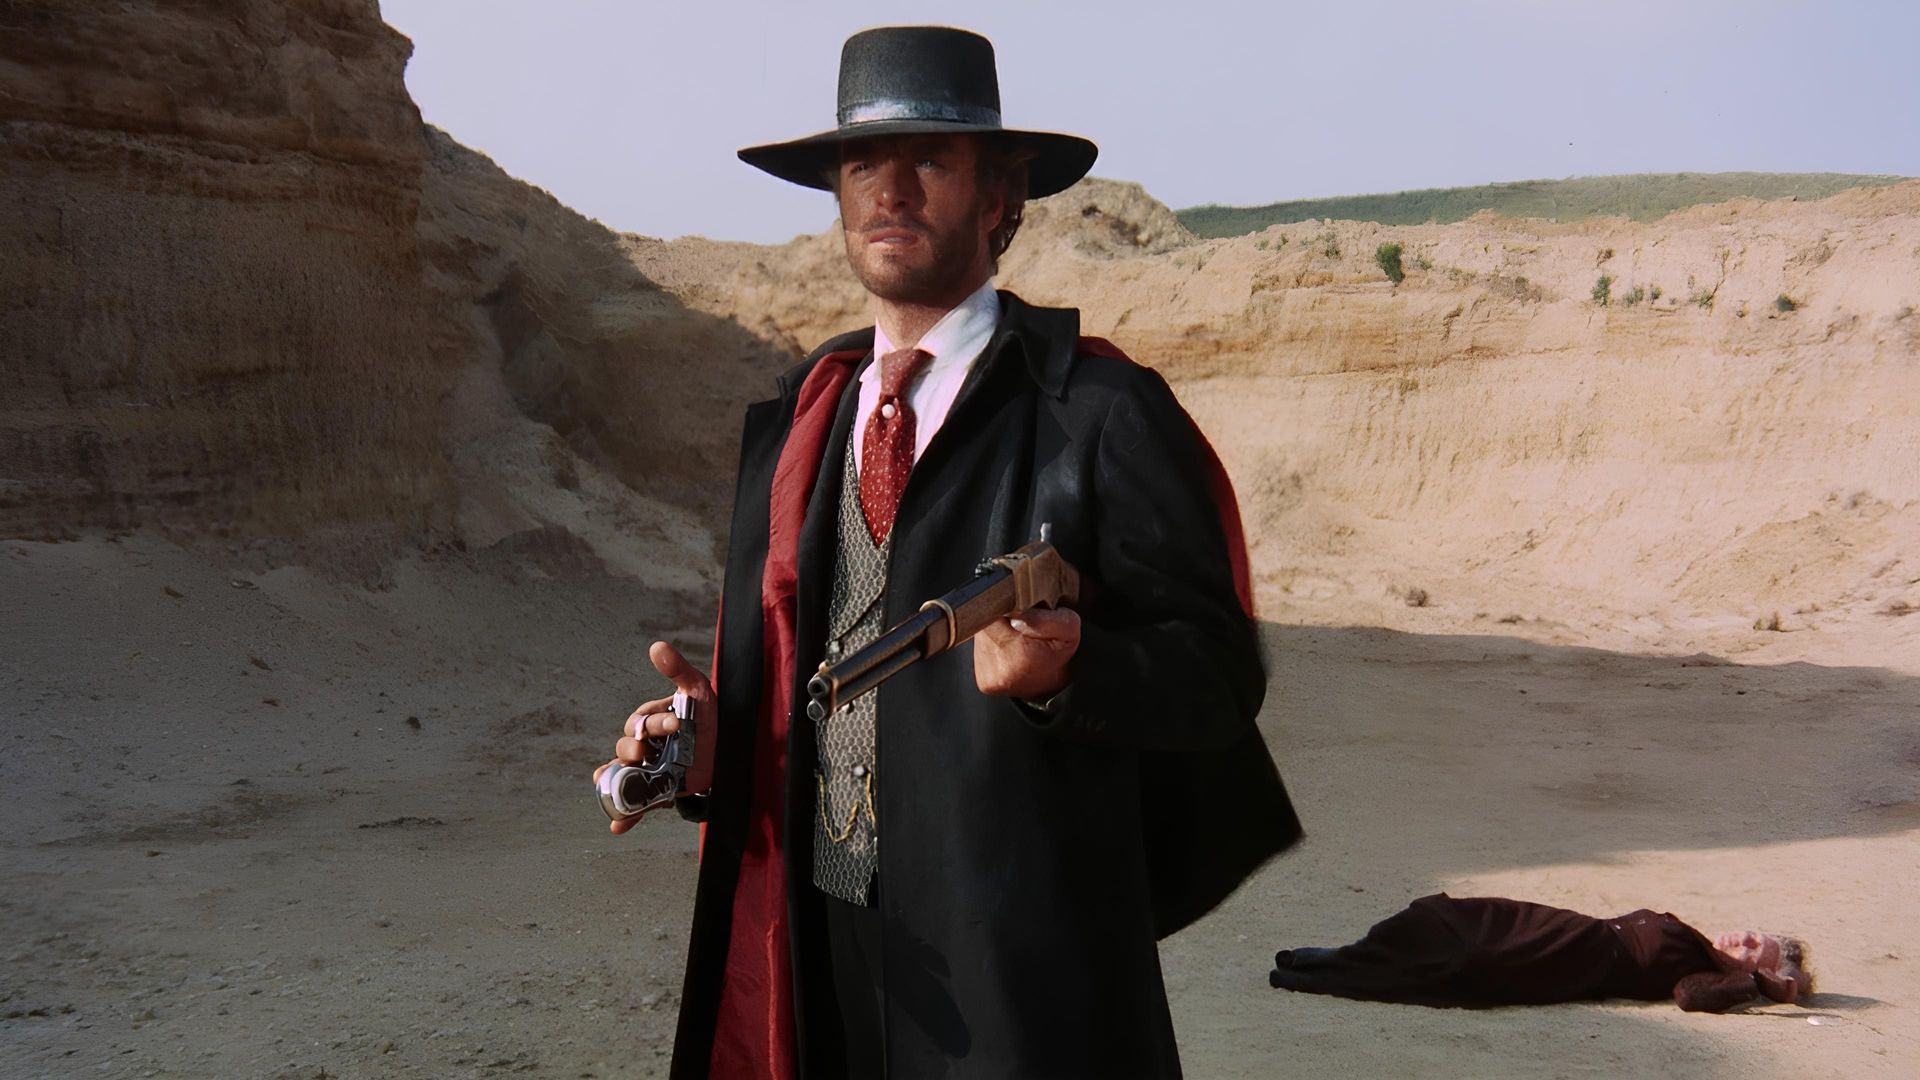 ... If You Meet Sartana Pray for Your Death. background